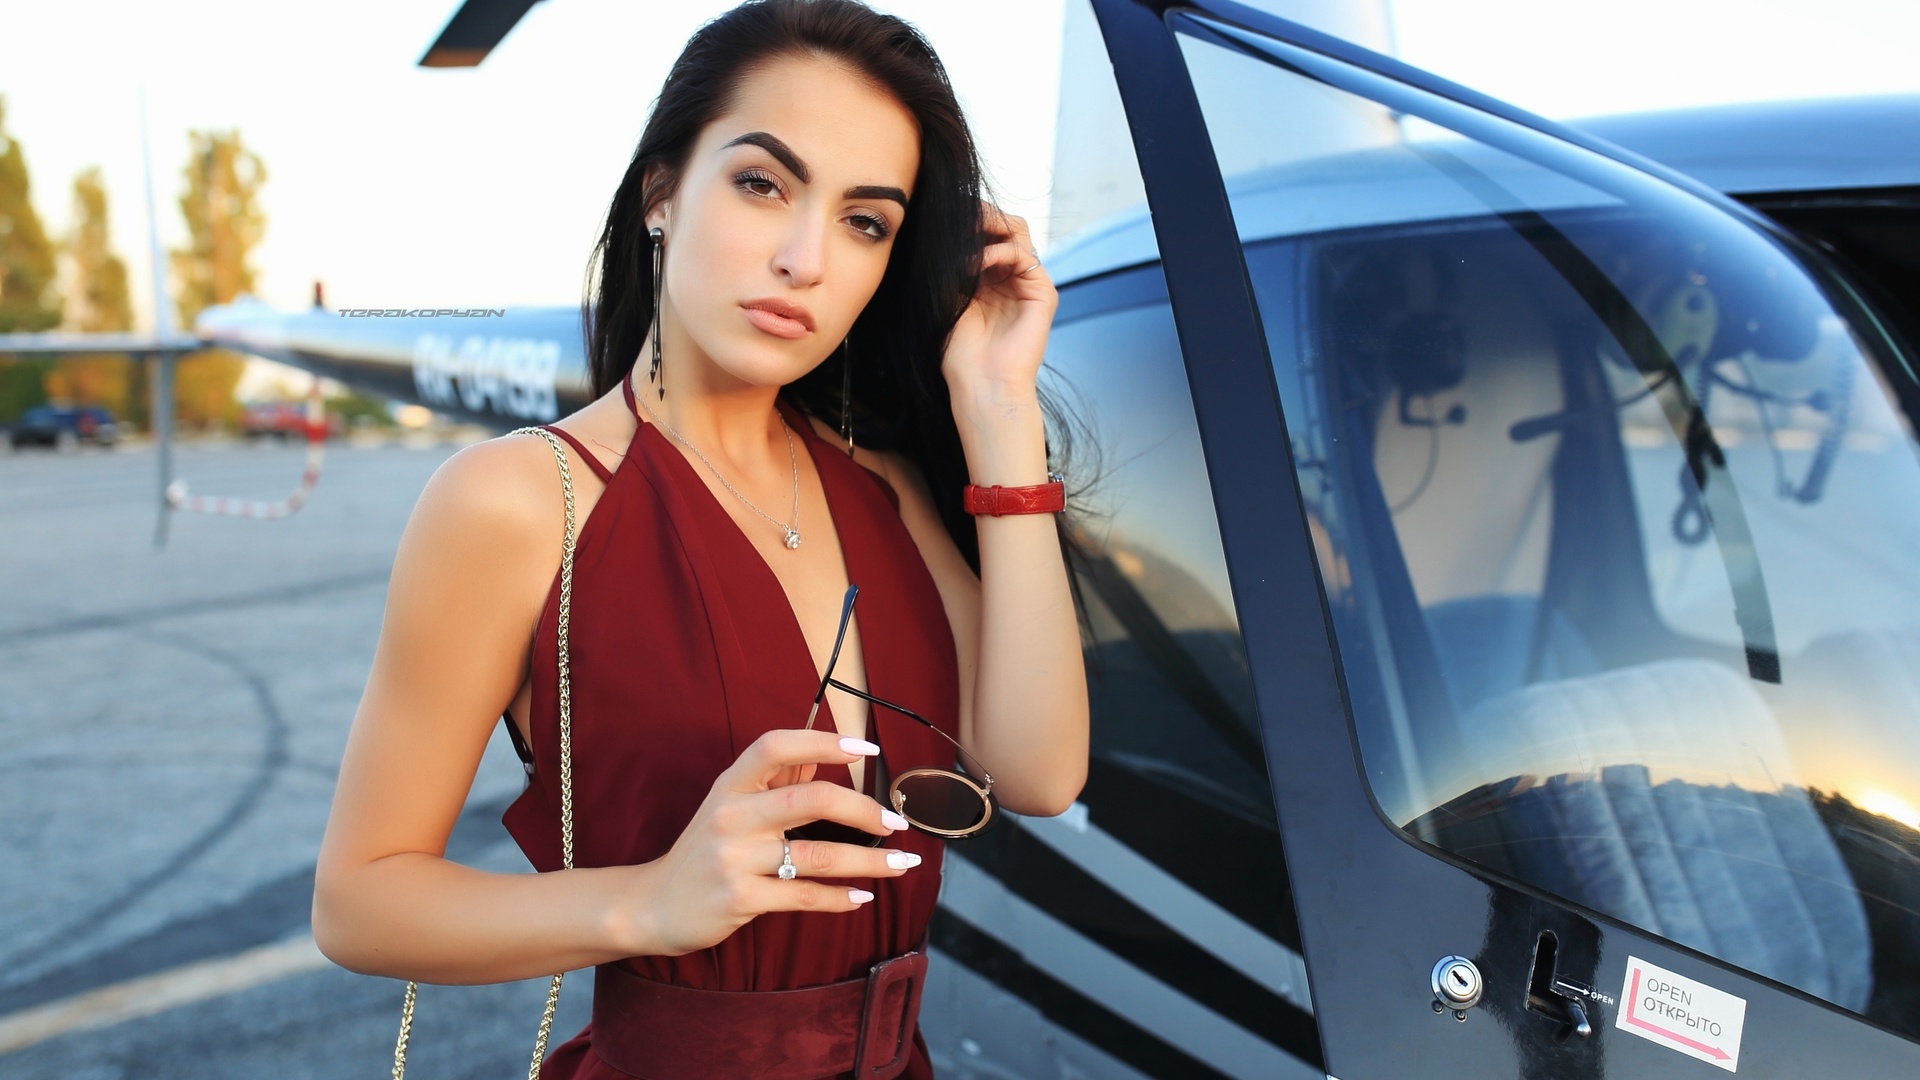 women, red dress, portrait, helicopter, cleavage, necklace, sunglasses, brunette, painted nails, belt